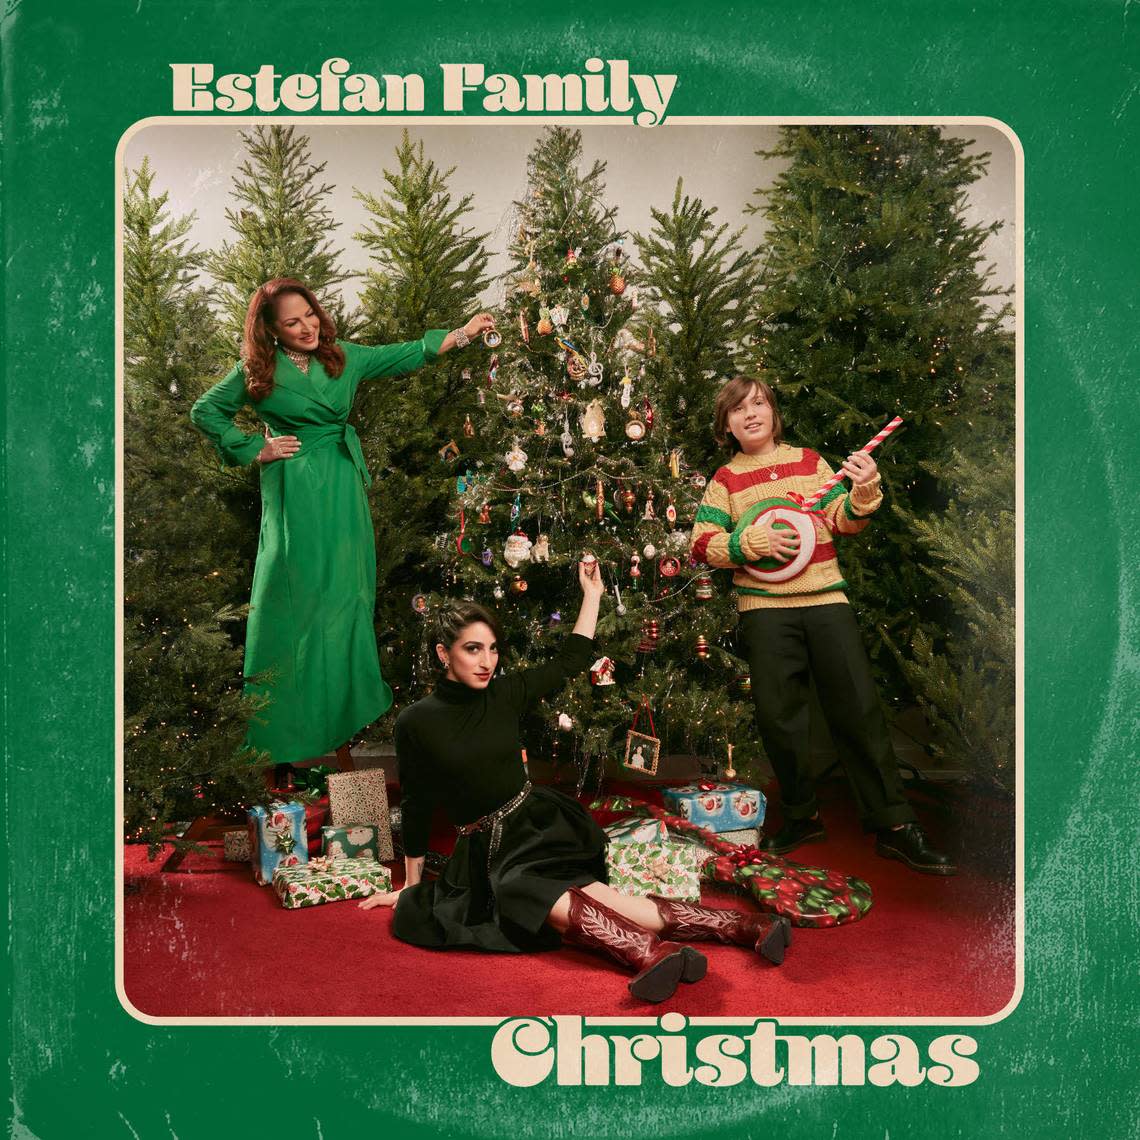 The “Estefan Family Christmas” album cover. The album was recorded in Miami in July 2022 at studios including Criteria and Crescent Moon and the musicians all played together, along with an orchestra on several cuts.